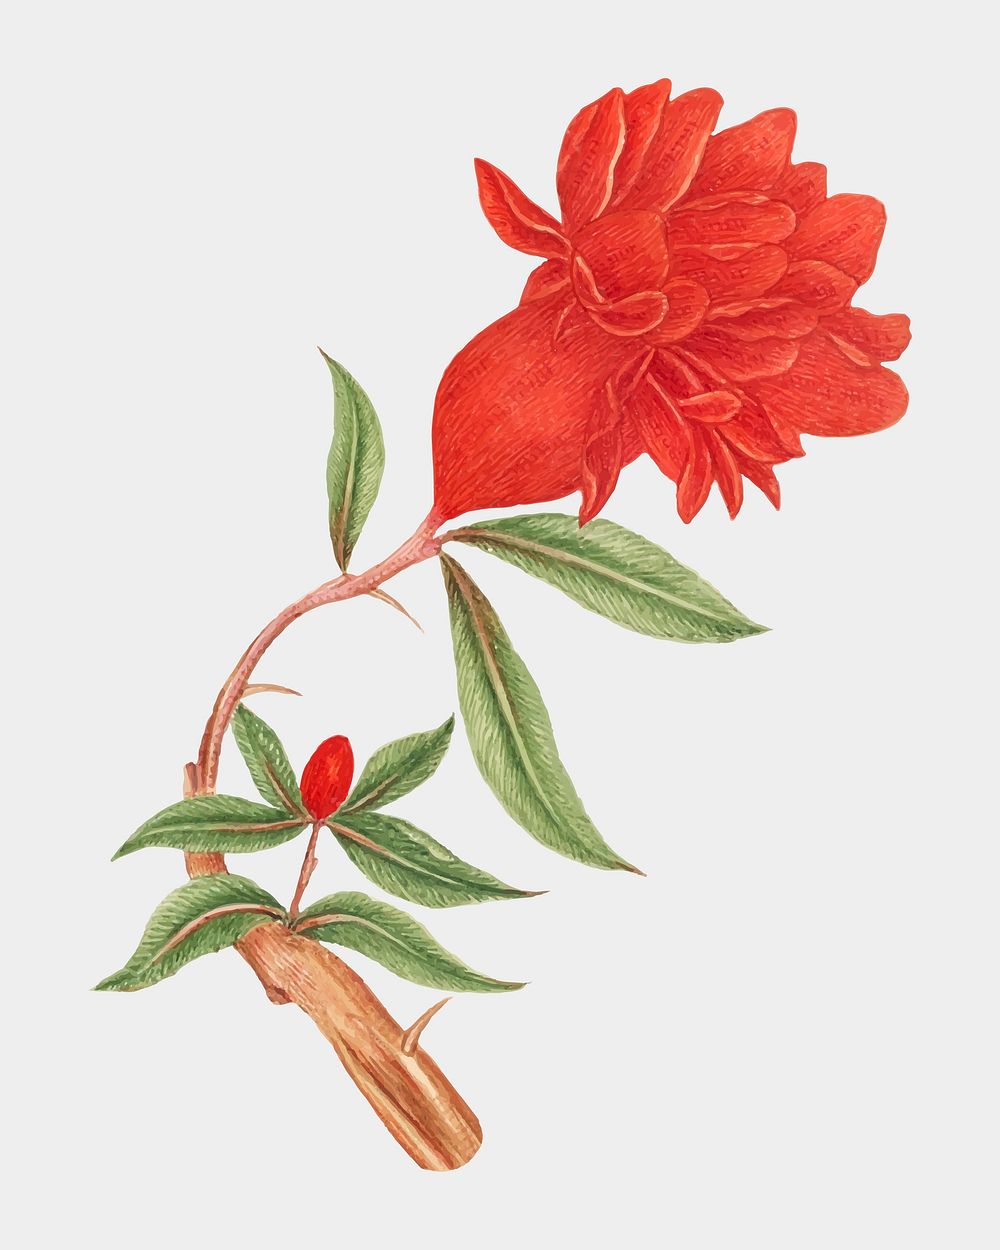 Vintage red blossoms vector illustration, remixed from the 18th-century artworks from the Smithsonian archive.